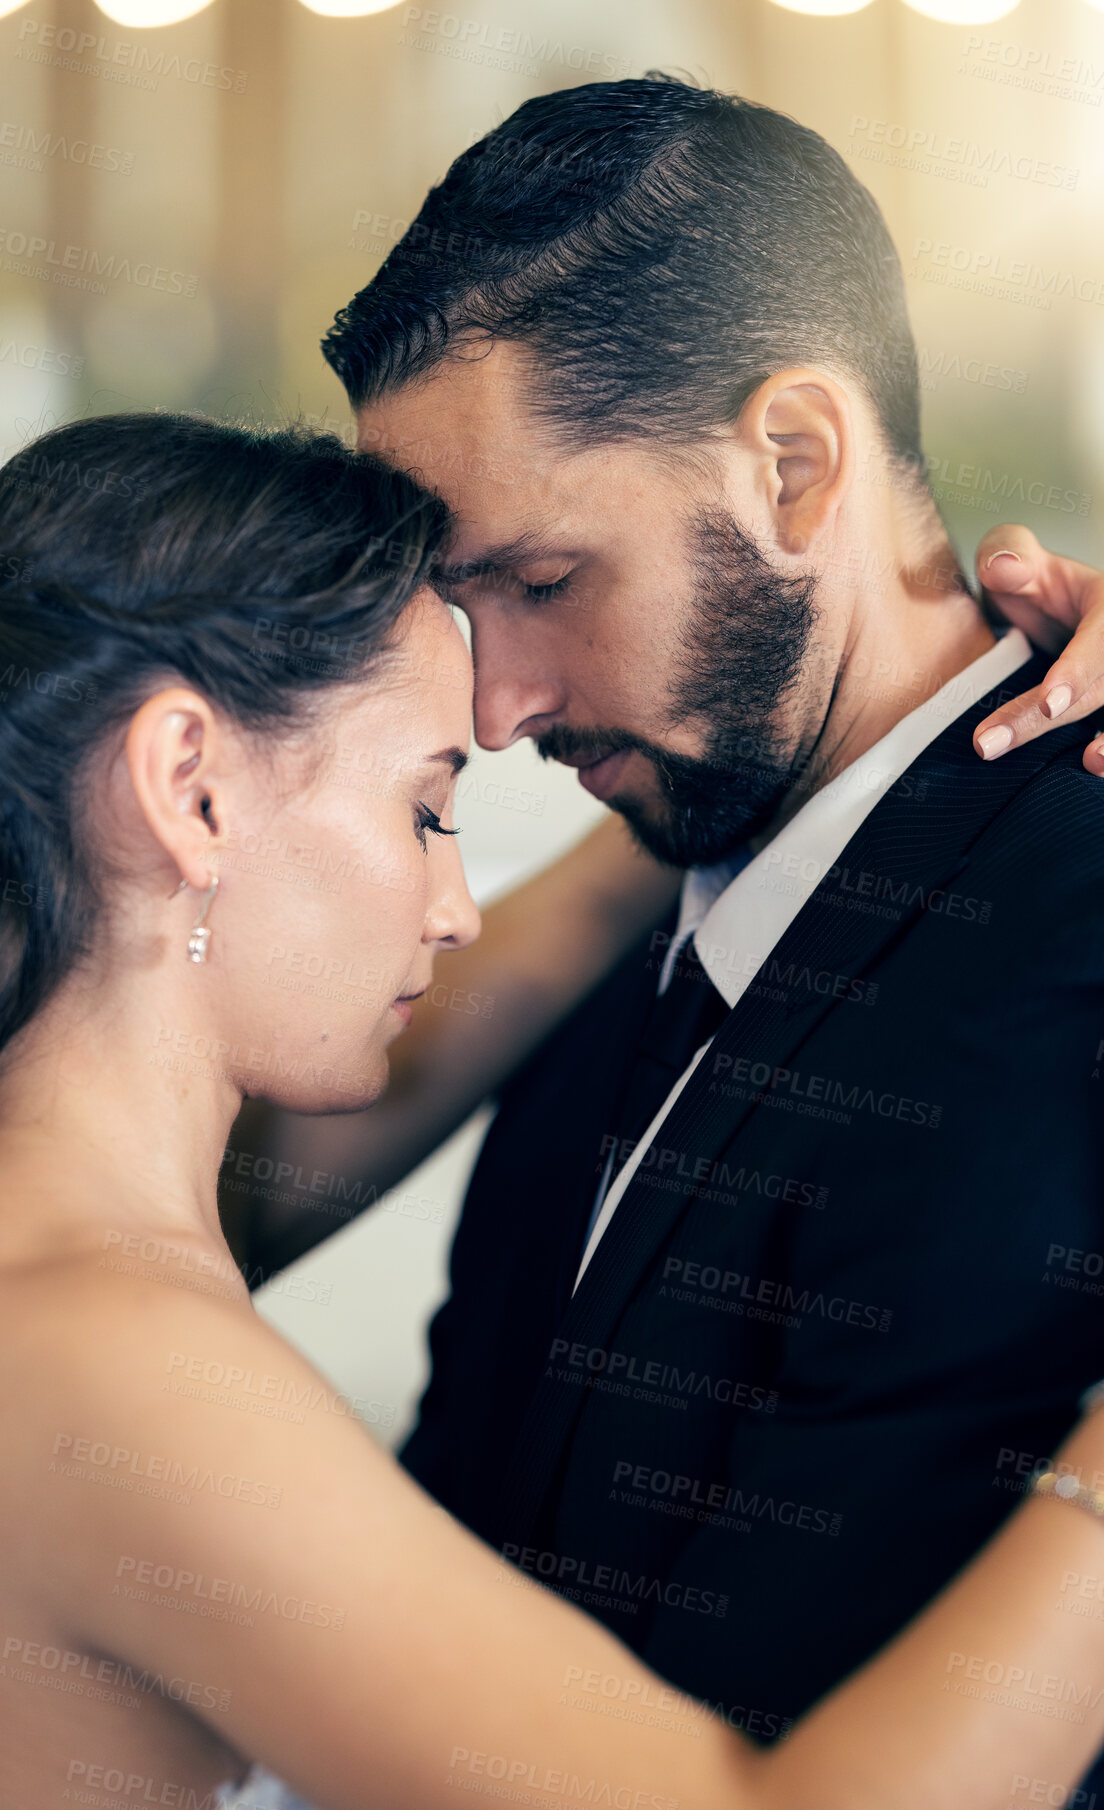 Buy stock photo Bride, groom or couple hug at wedding event, love union or save the date celebration in trust, support or security bond. Man, woman or marriage reception dance, prayer or romance commitment ceremony